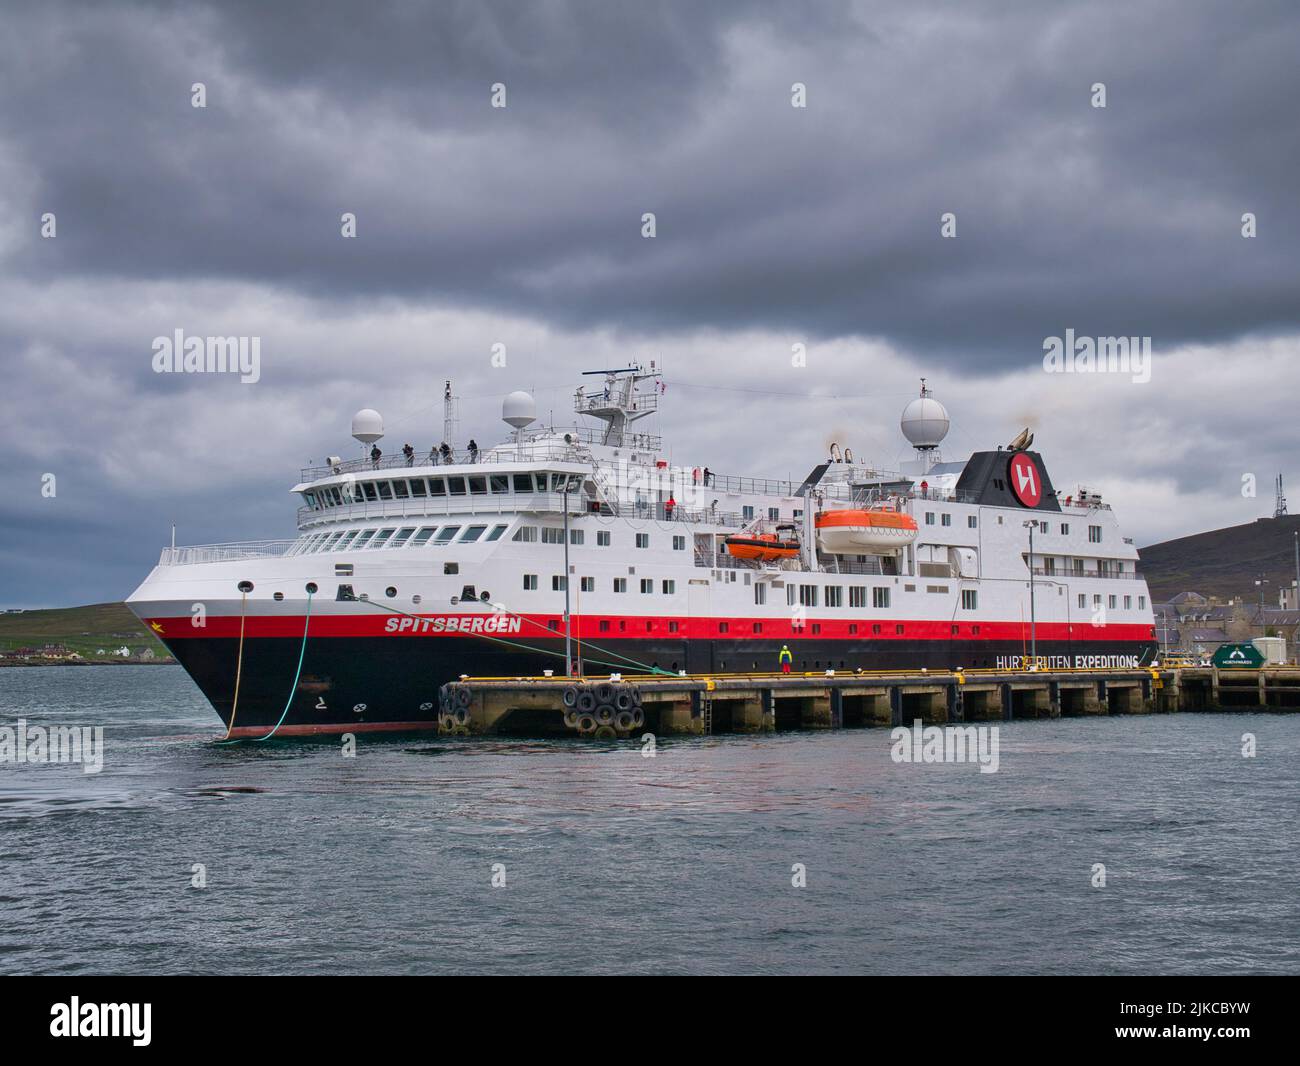 The Hurtigruten cruise ship Spitsbergen moored at Lerwick, capital of Shetland in the UK. Taken on a cloudy, overcast day. Stock Photo